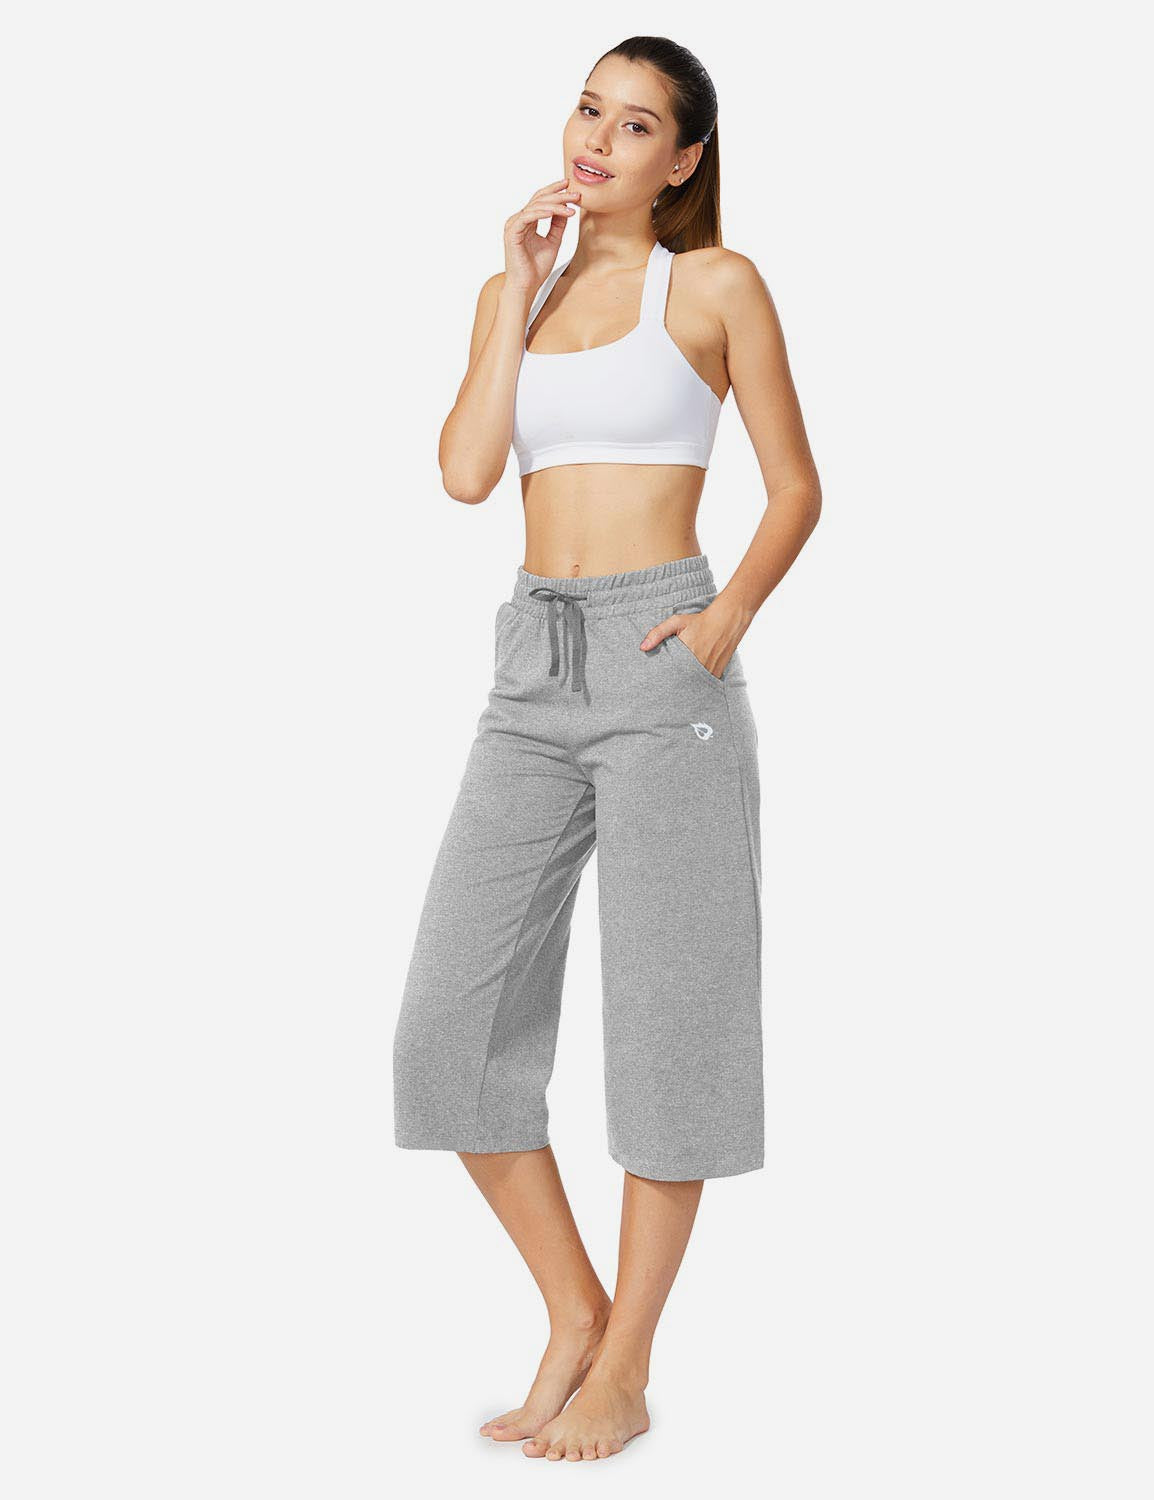 Baleaf Women's 20'' High Rise Drawcord Loose Fit Pocketed Sweatpants abh107 Light Gray Full